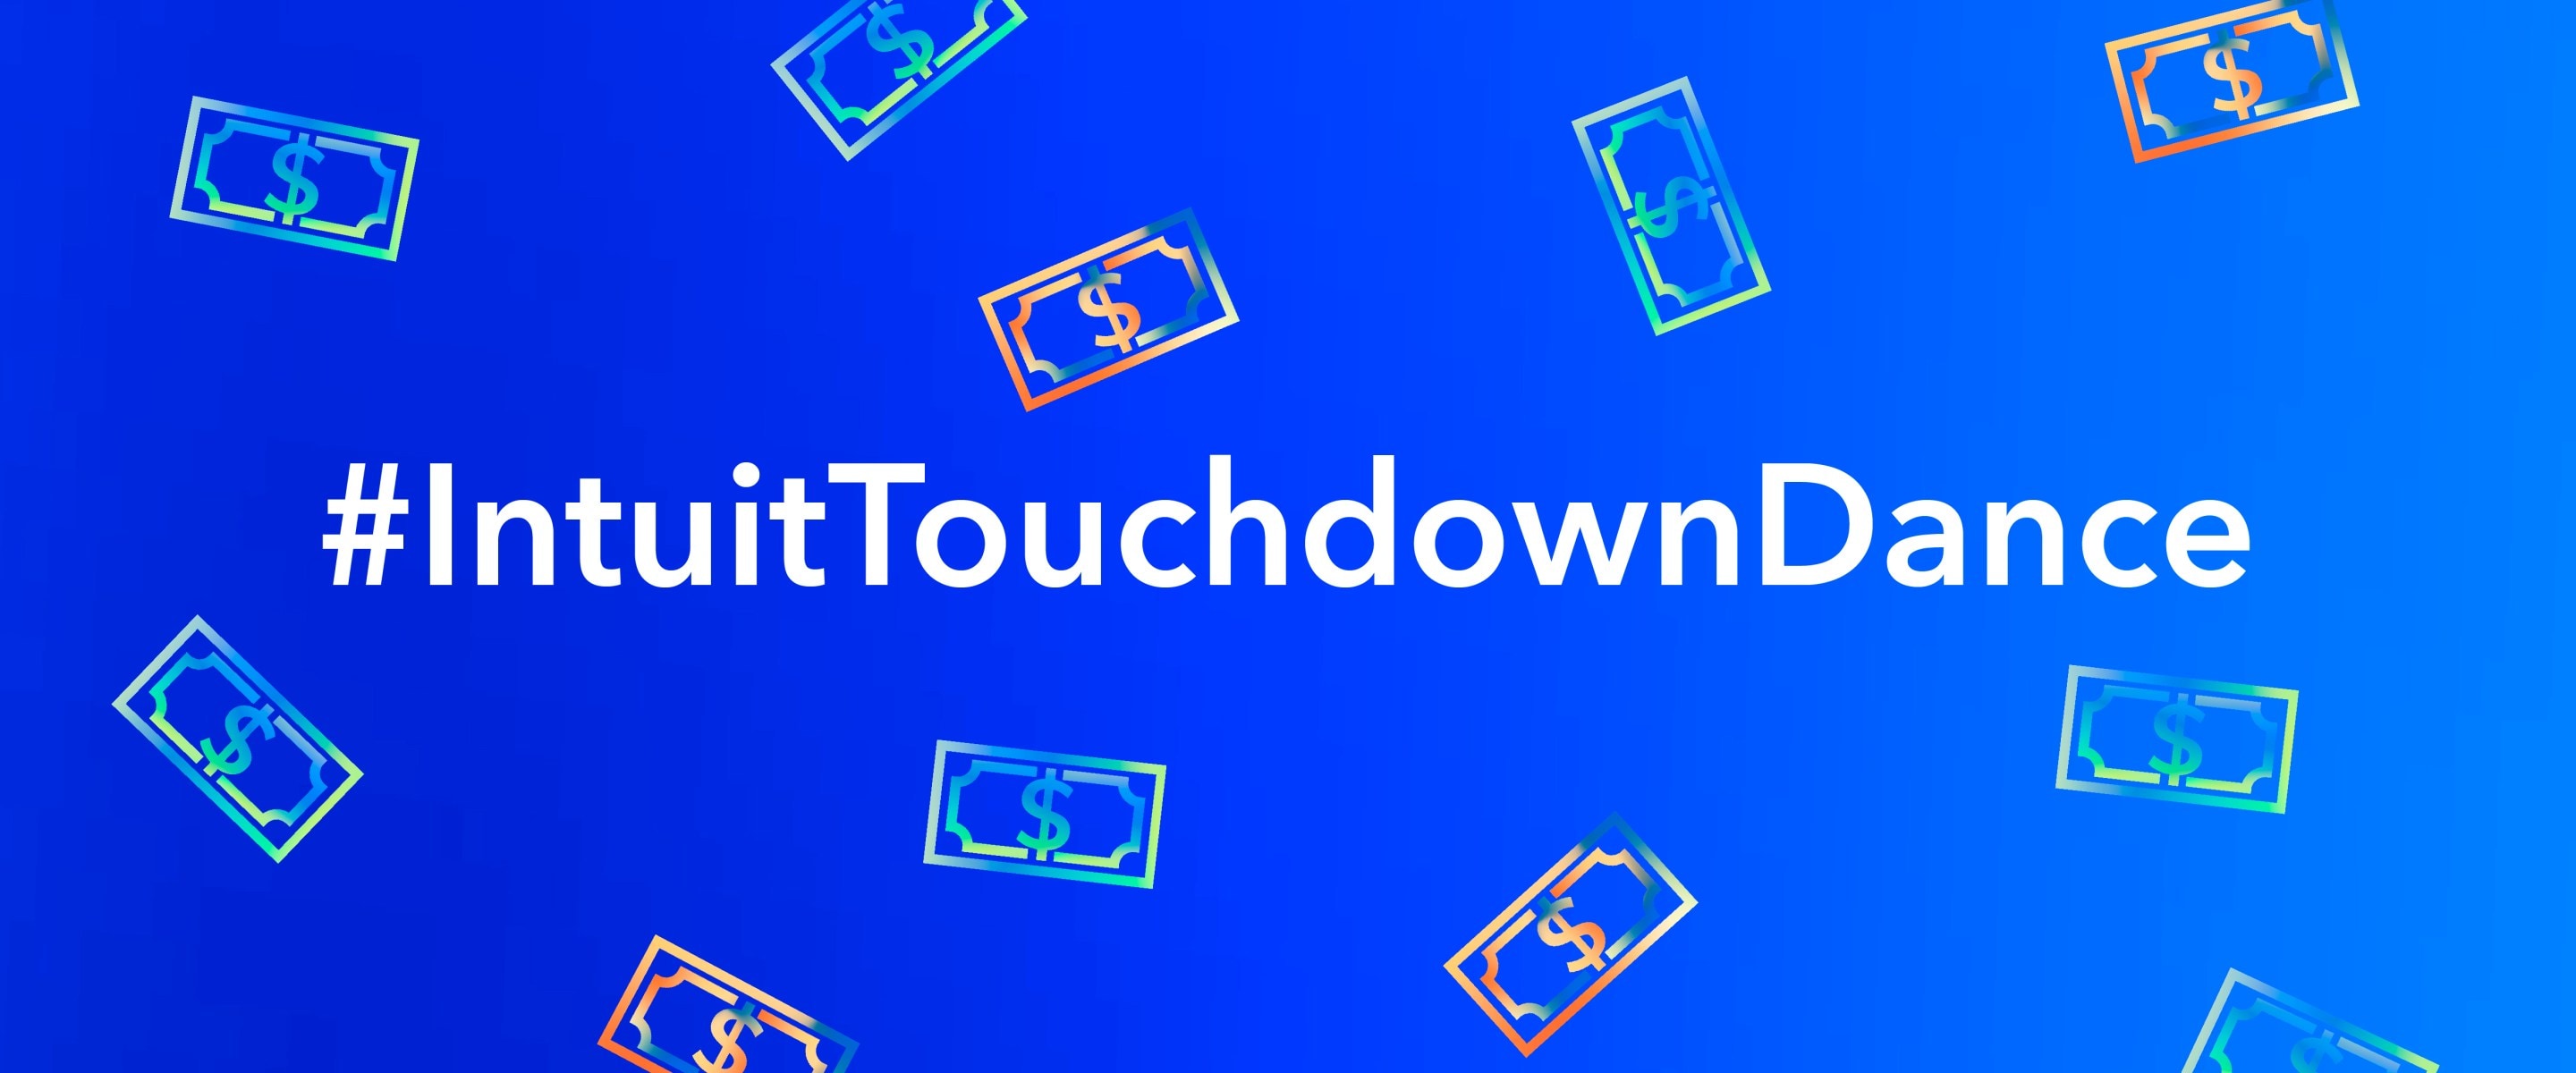 Announcing our #IntuitTouchdownDance